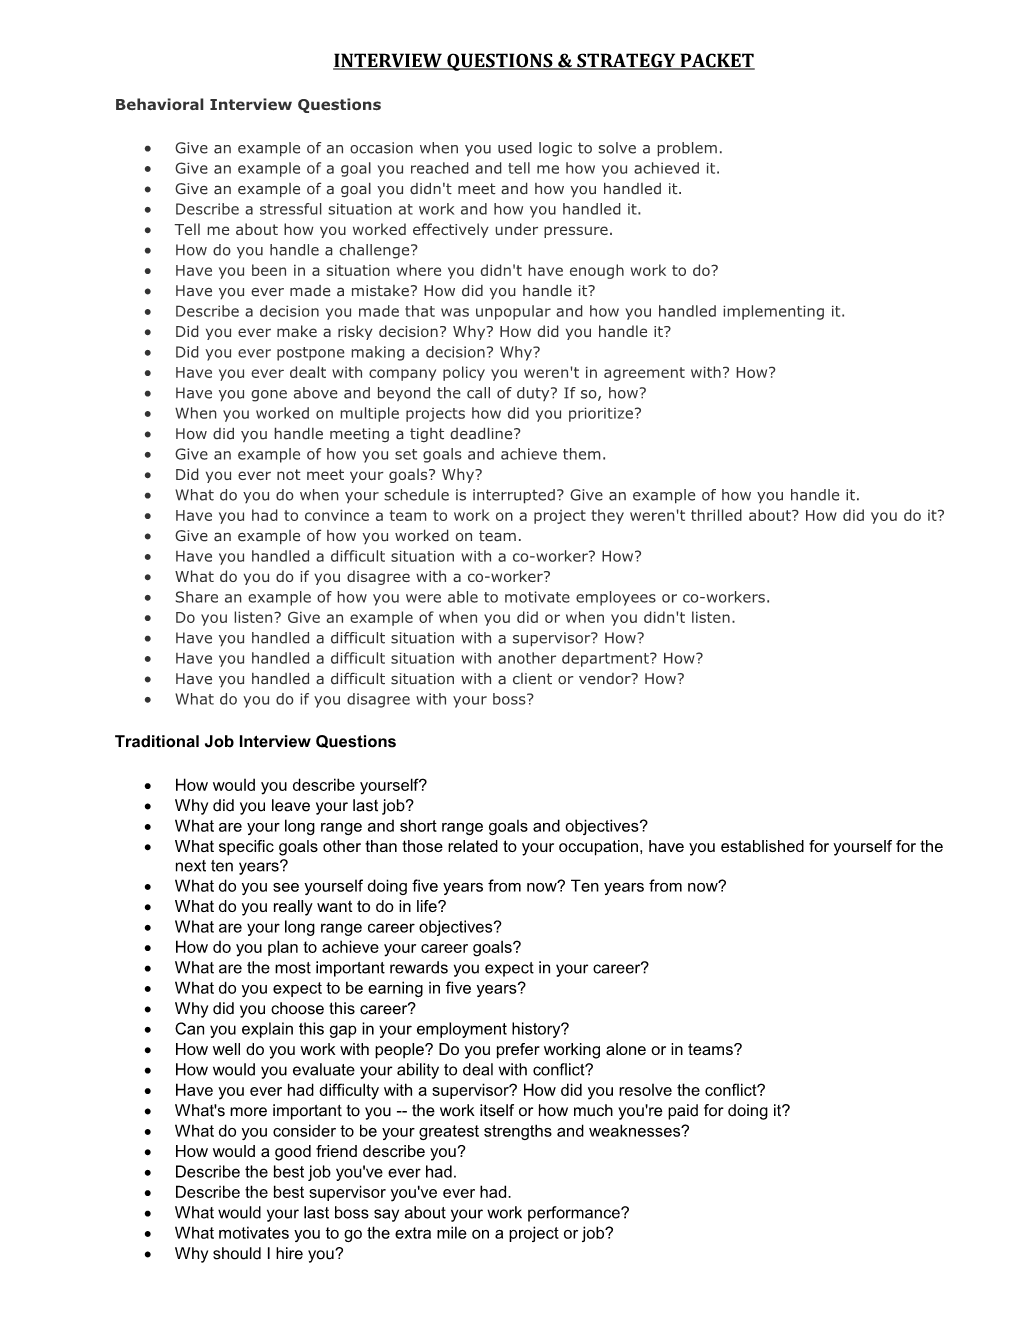 Traditional Job Interview Questions